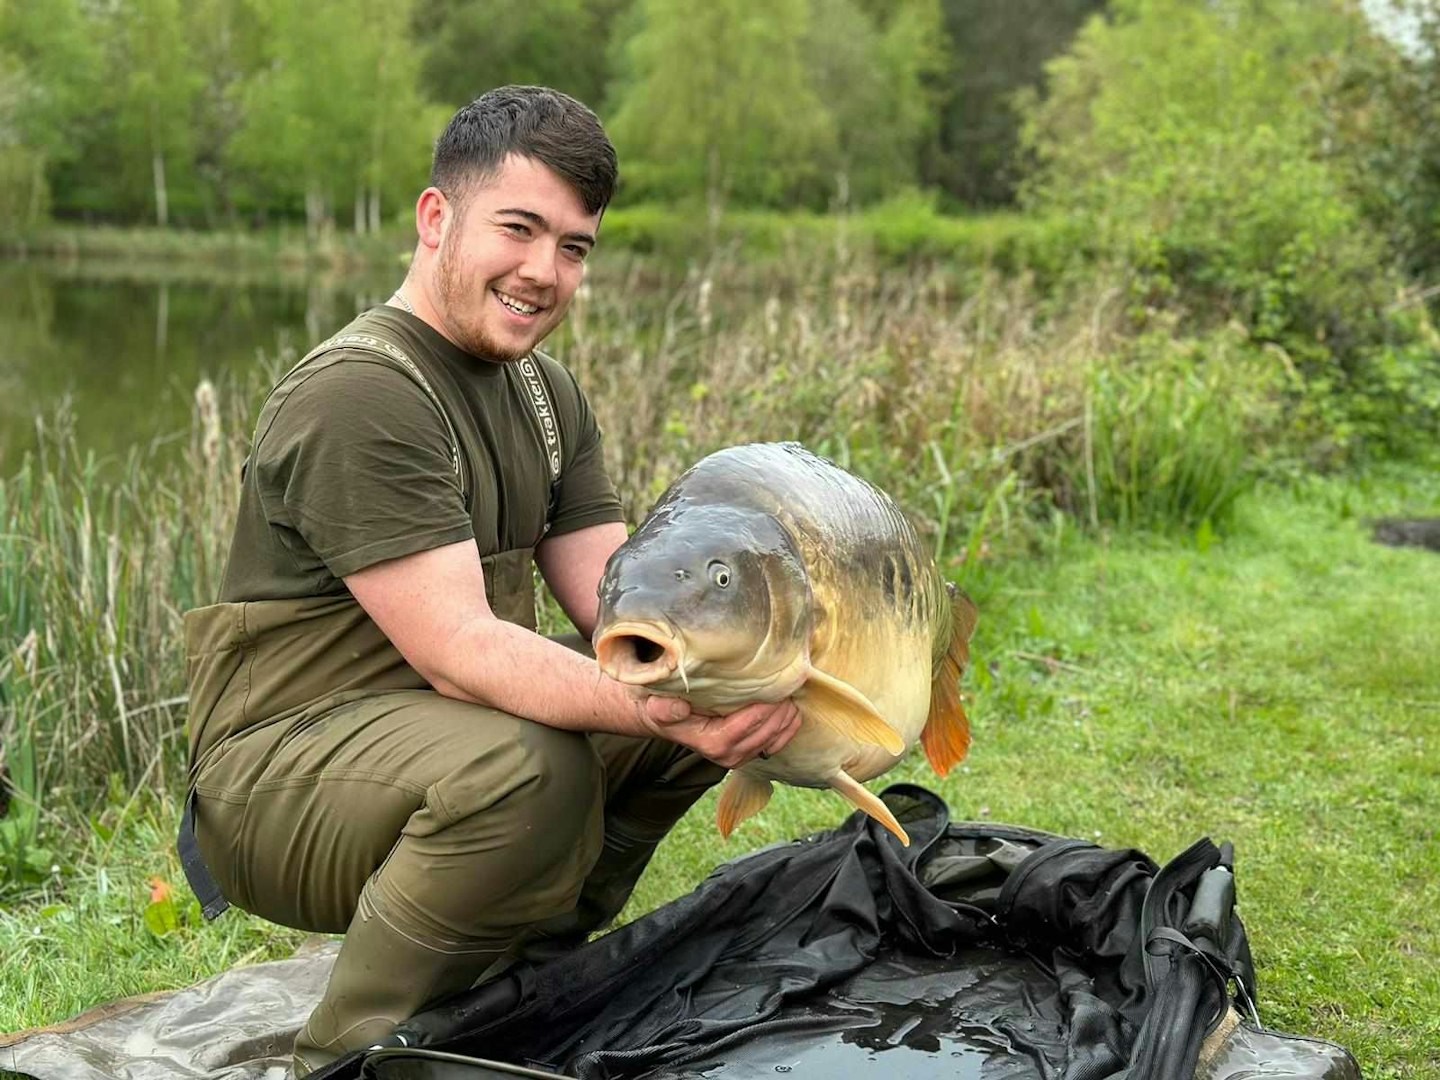 Stephen holding up one of five, 50lb carp landed during the session!